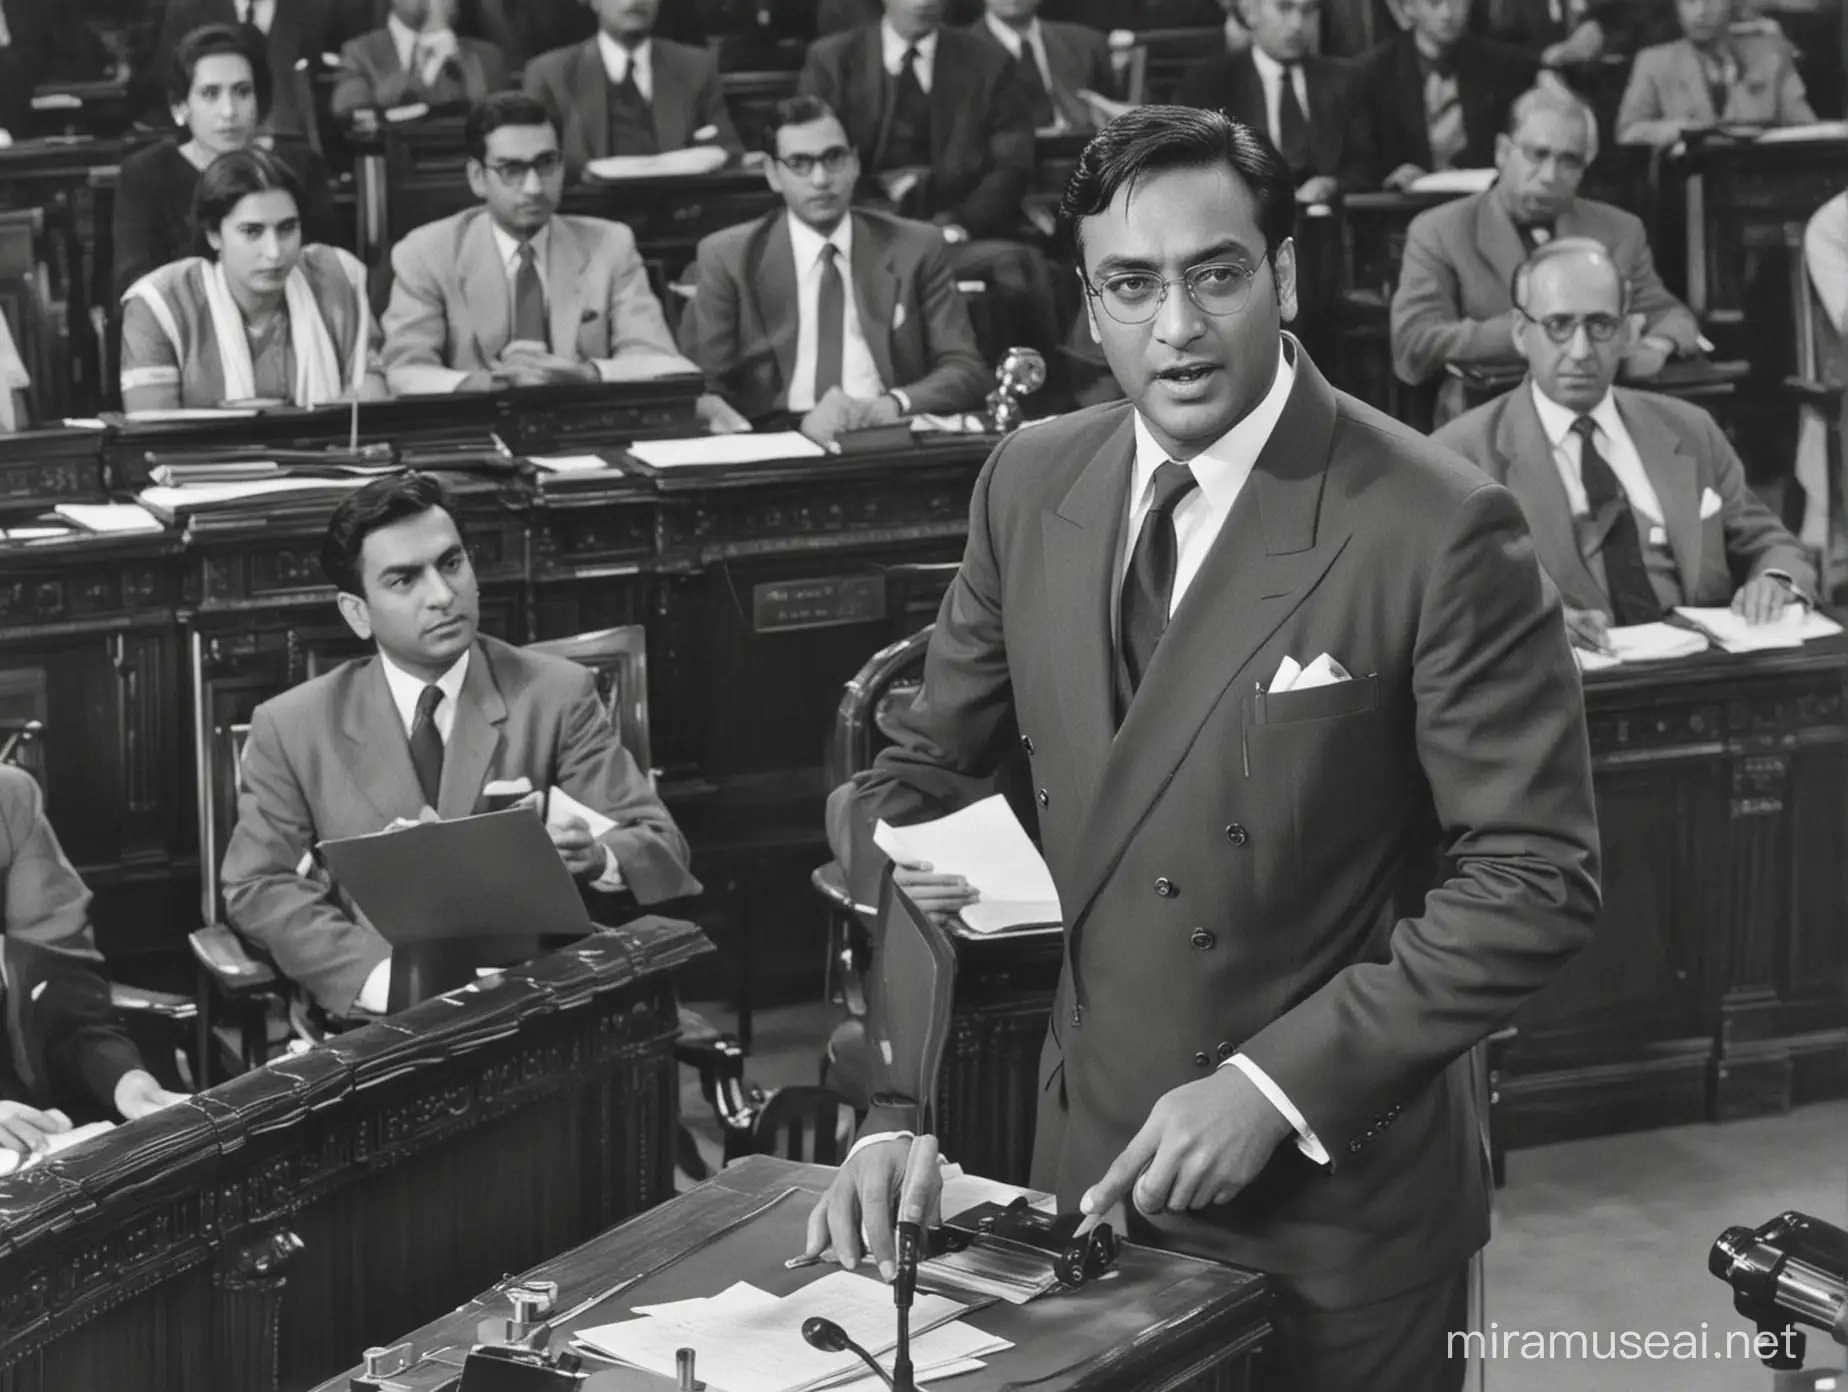 Ajay Devgn as a diplomat in 1952. He is standing in the lok sabha and giving a speech to the leaders trying to convince them about the elections